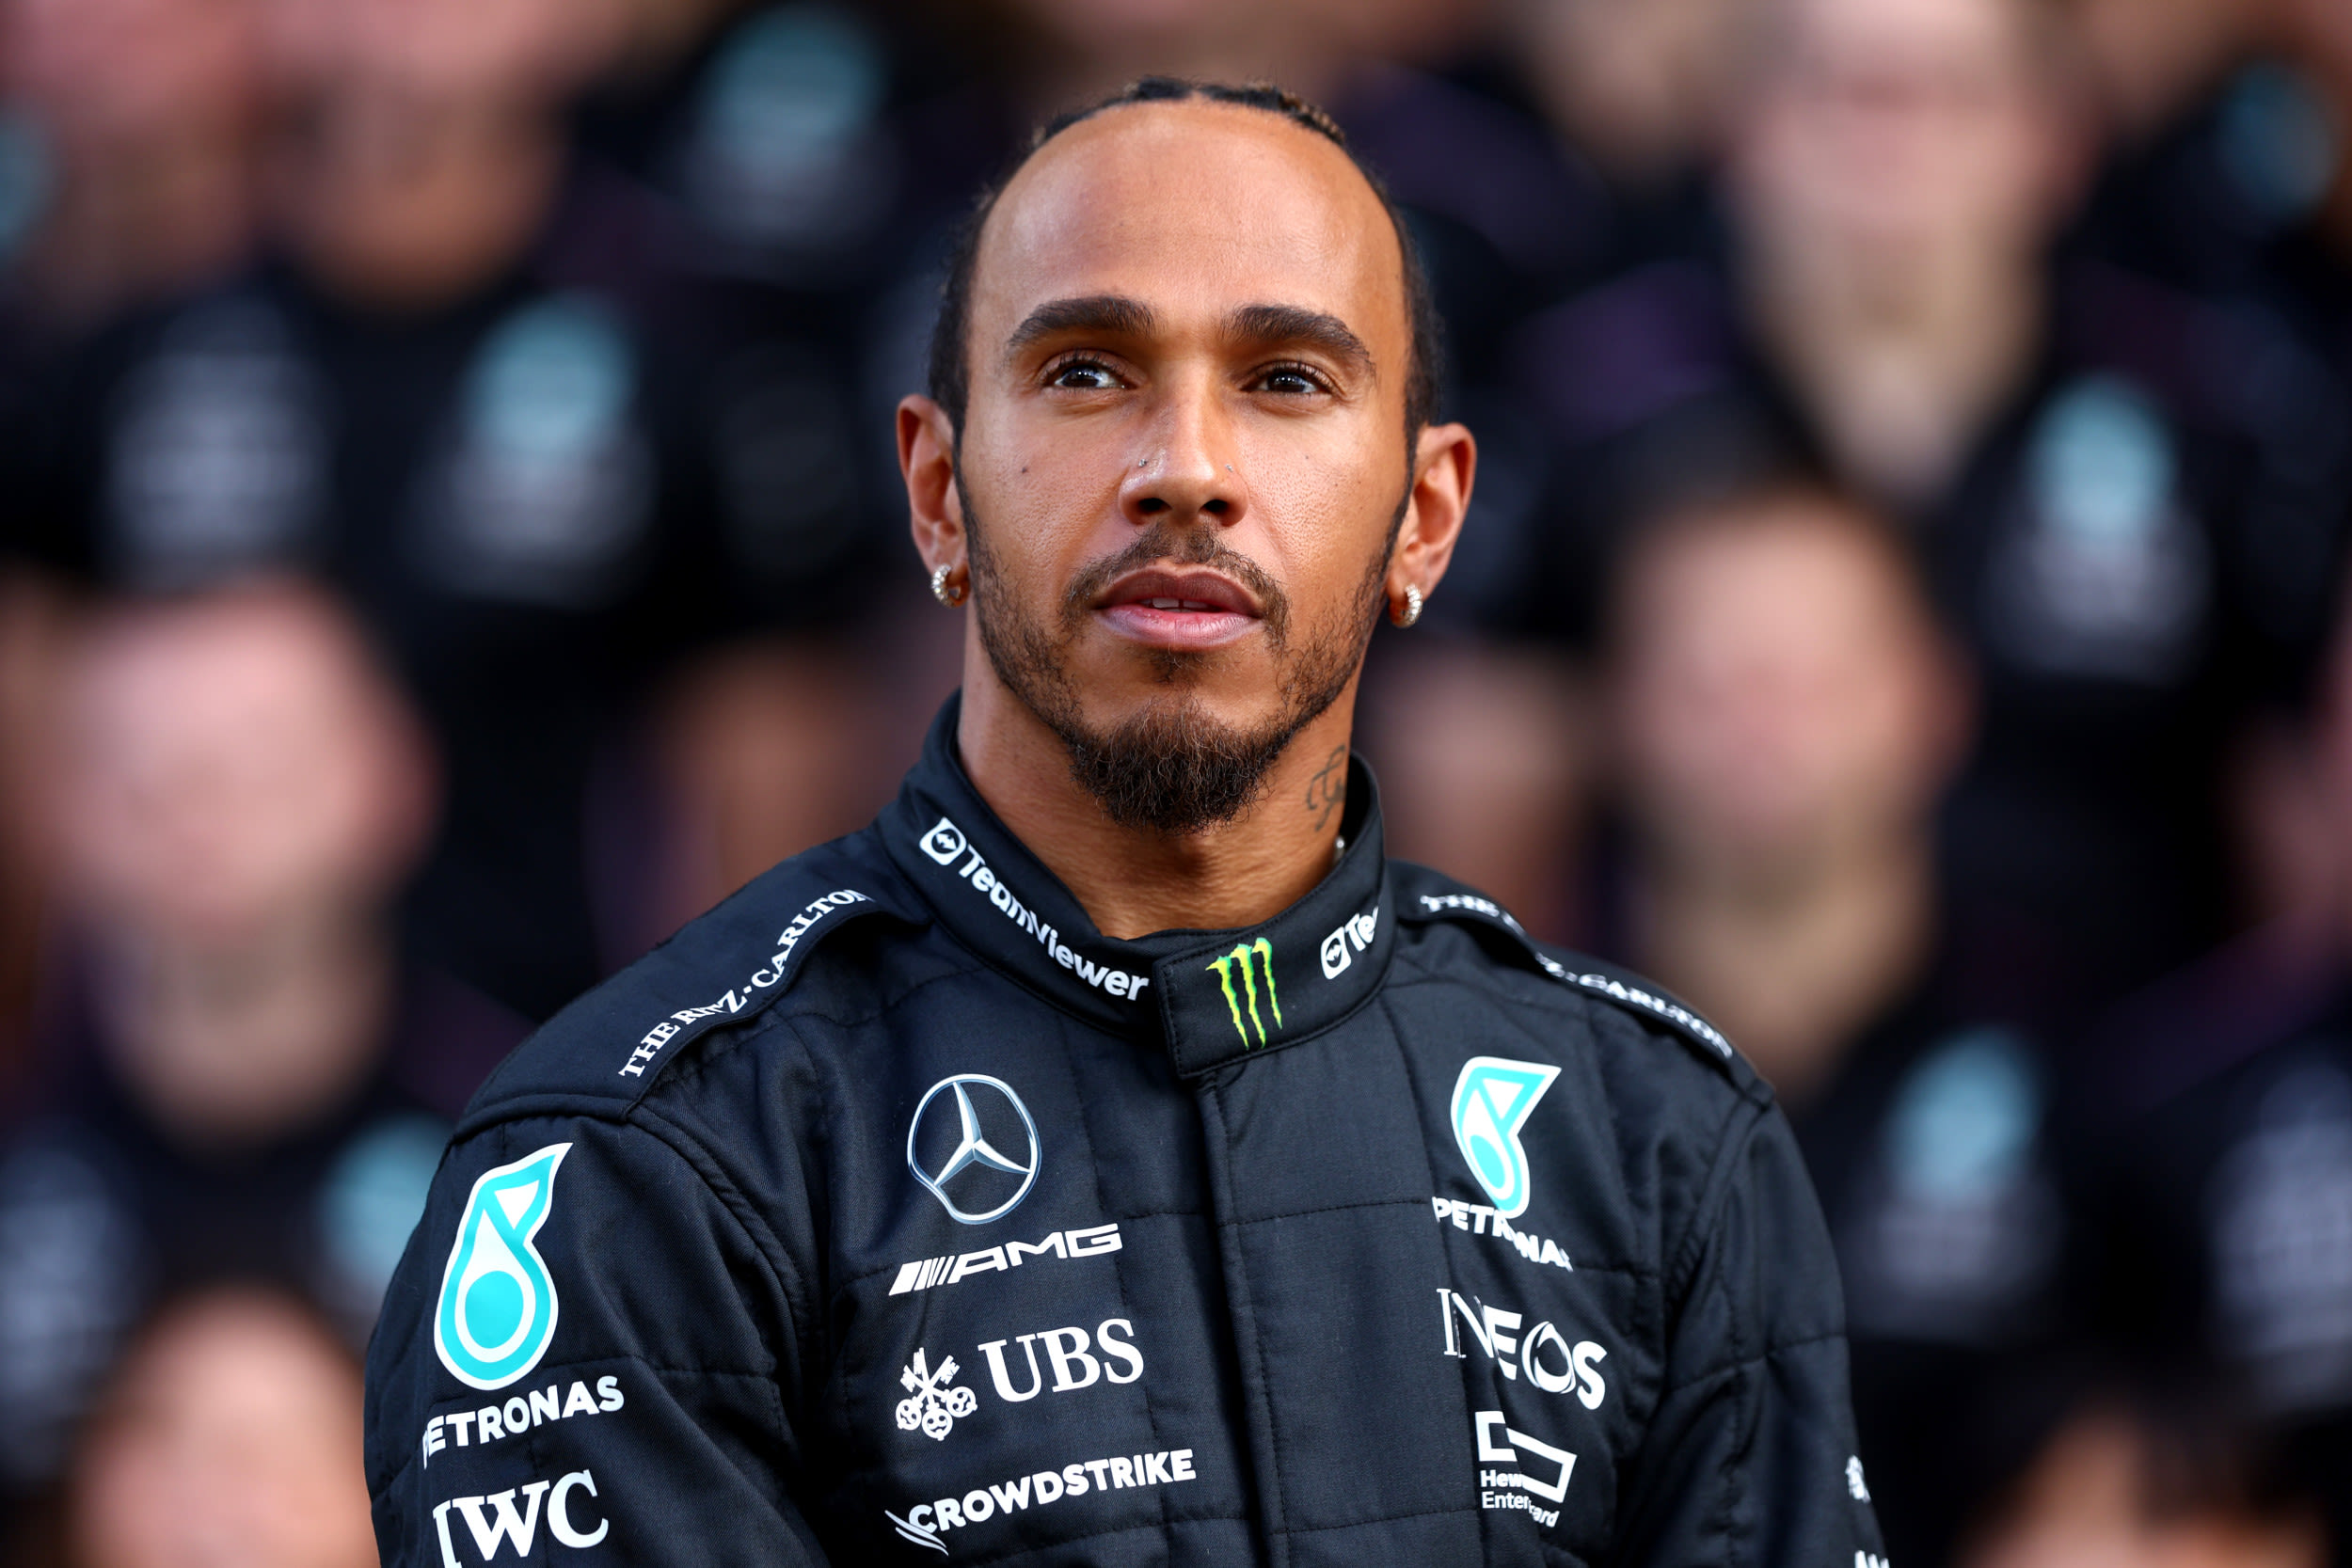 Lewis Hamilton's American accent goes viral